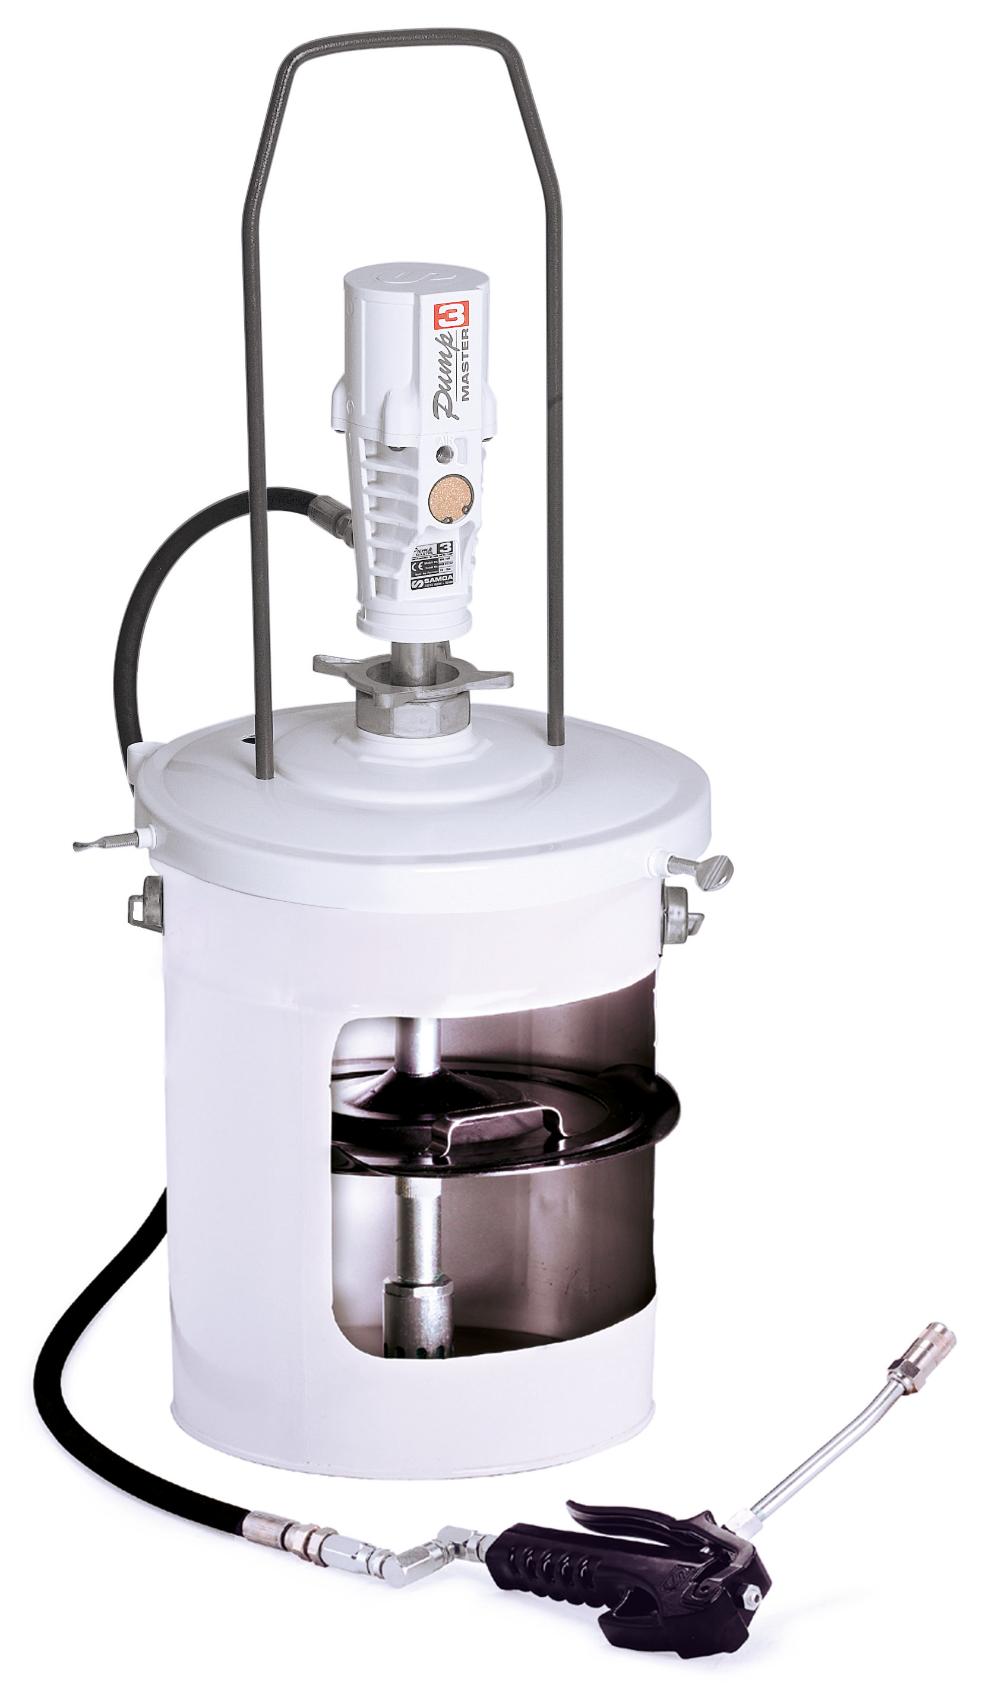 PUMPMASTER 3 - 55:1 RATIO GREASE PNEUMATIC PUMP, 20 KG PAILS PORTABLE PACKAGE WITH FOLLOWER PLATE